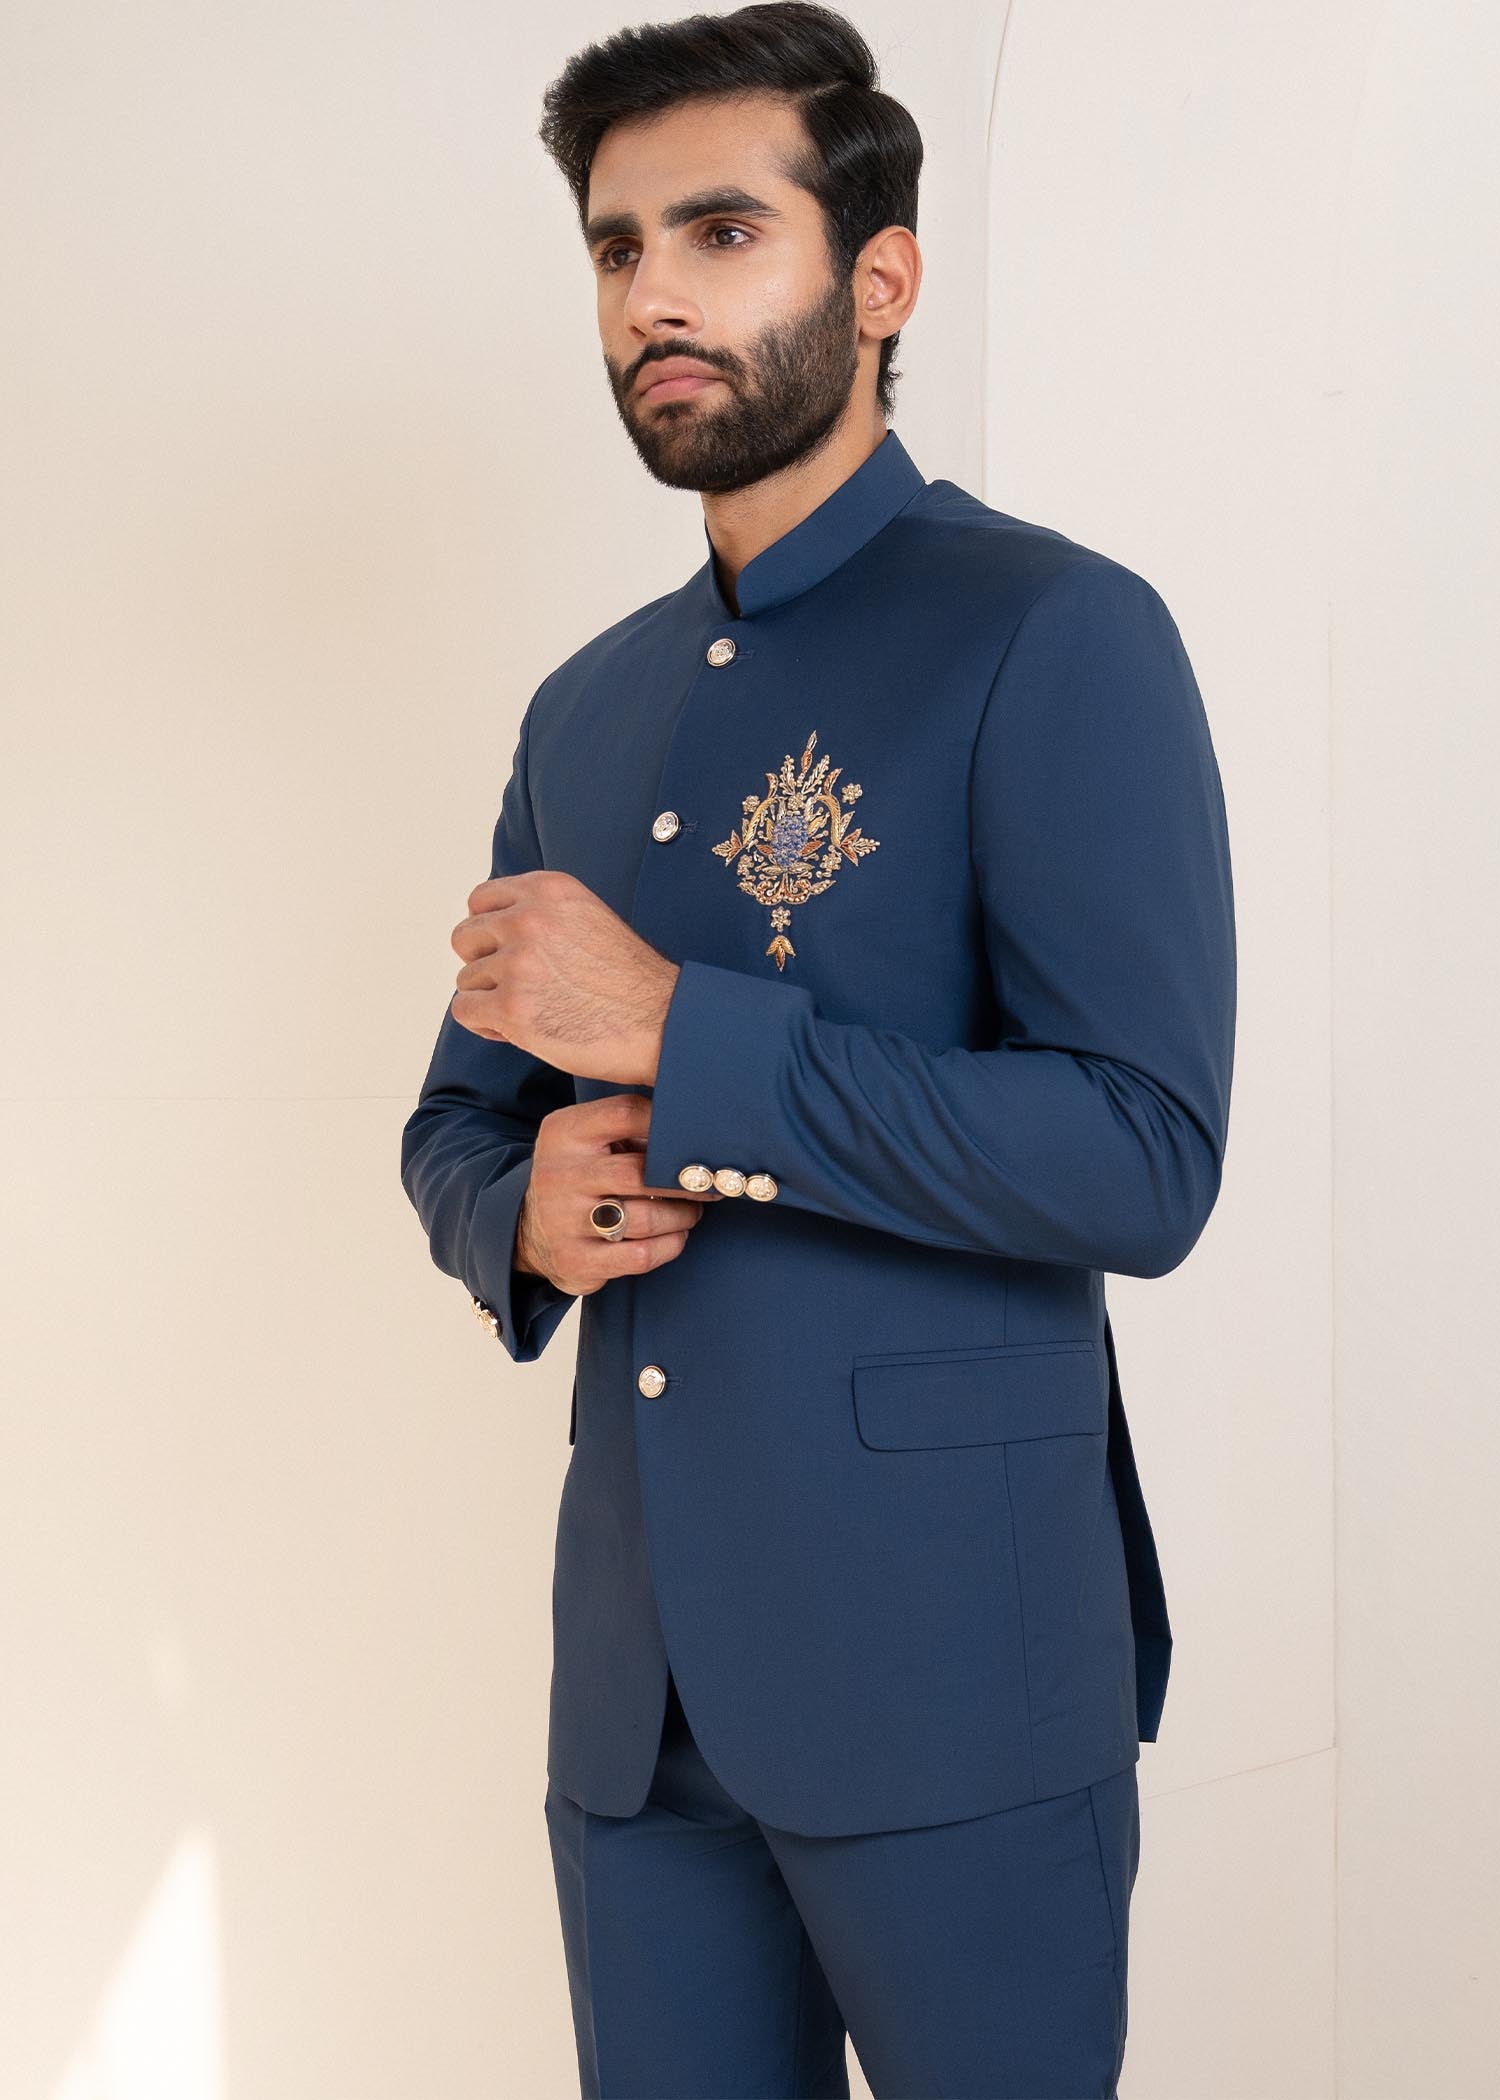 Buy Luxurious Royal Prince Suits From Shameel Khan | Mens casual dress  outfits, Latest african men fashion, African men fashion